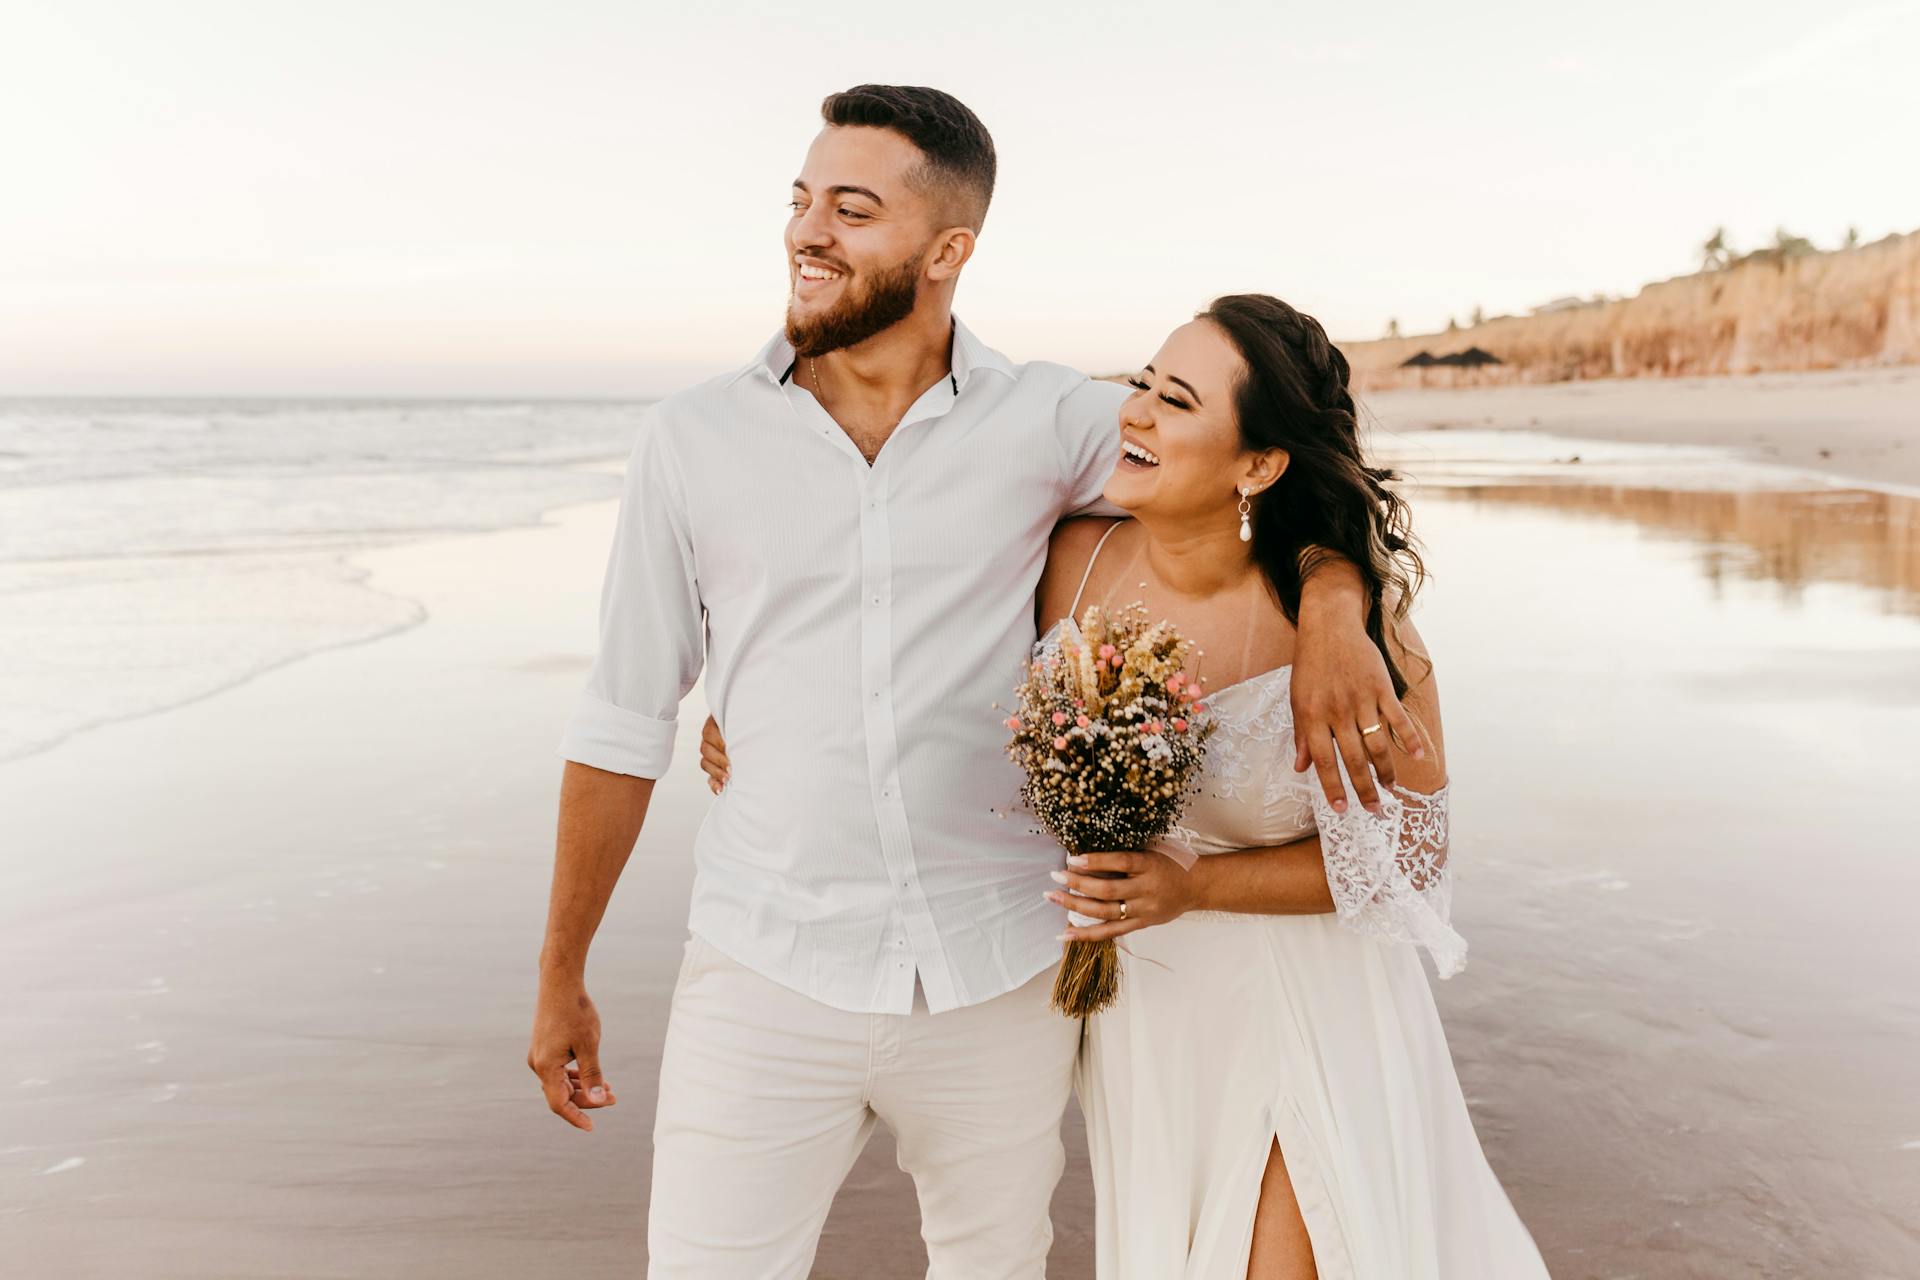 A young married couple | Source: Pexels